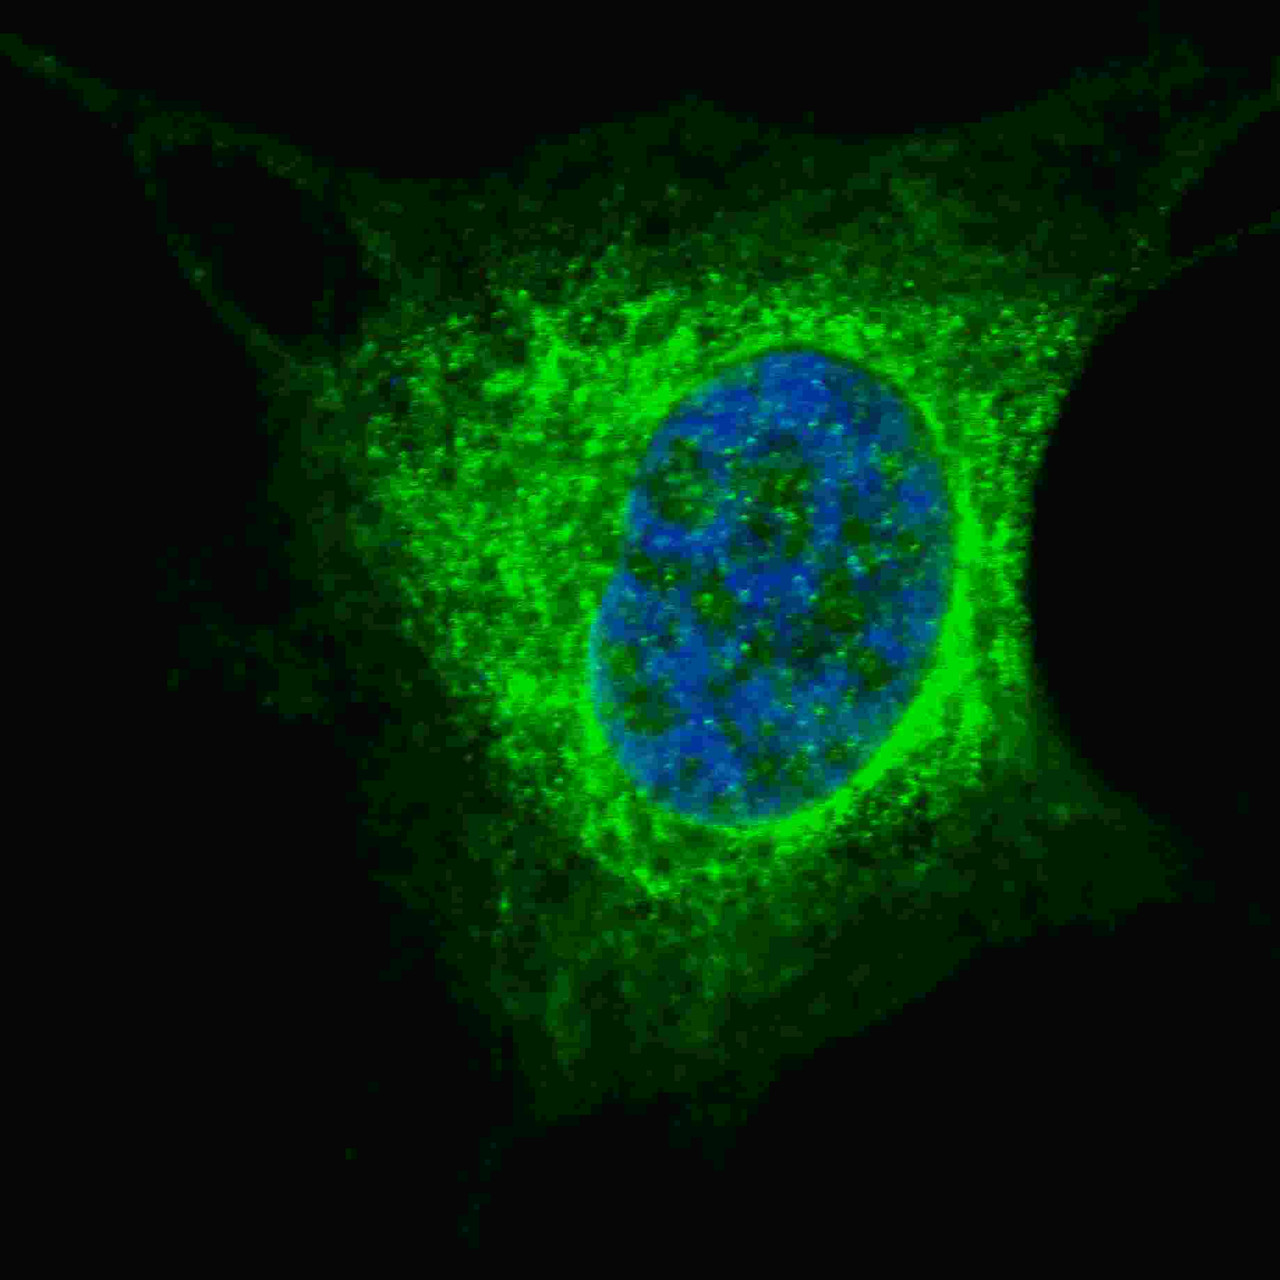 Fluorescent confocal image of SY5Y cells stained with Vimentin (S82) antibody. SY5Y cells were fixed with 4% PFA (20 min) , permeabilized with Triton X-100 (0.2%, 30 min) . Cells were then incubated with Vimentin (S82) primary antibody (1:200, 2 h at room temperature) . For secondary antibody, Alexa Fluor 488 conjugated donkey anti-rabbit antibody (green) was used (1:1000, 1h) . Nuclei were counterstained with Hoechst 33342 (blue) (10 ug/ml, 5 min) . Note the highly specific localization of the Vimentin immunosignal to the cytoskeleton, supported by Human Protein Atlas Data (http://www.proteinatlas.org/ENSG00000026025) .